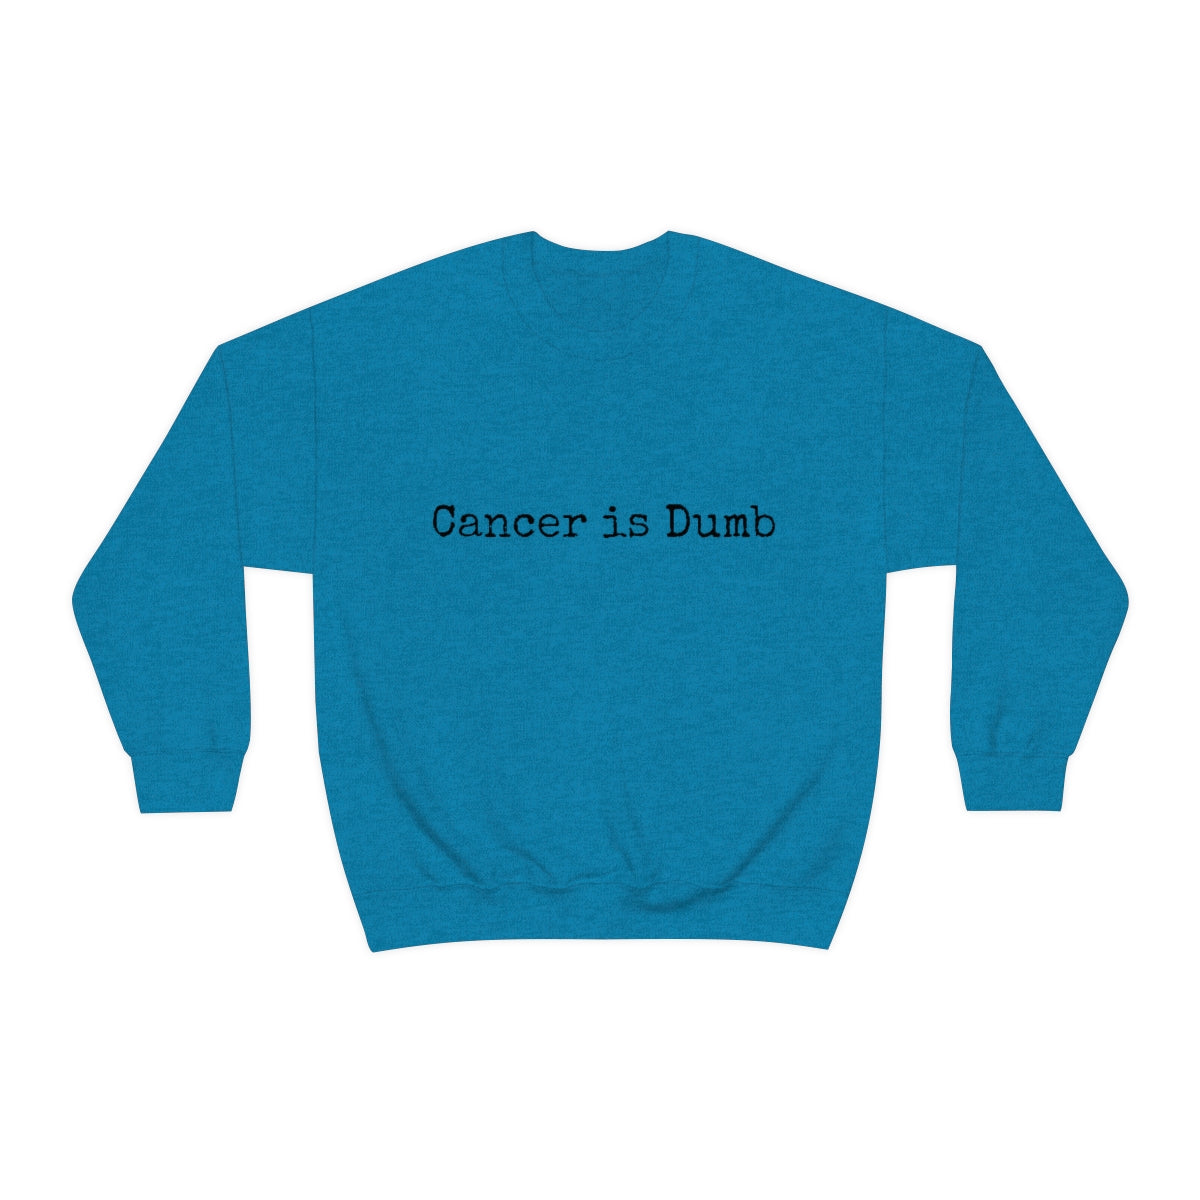 Unisex Heavy Blend™ Crewneck Sweatshirt Mens Womens Apparel Clothing Anti Cancer Cancer is Dumb Survivor Support Humorous Funny